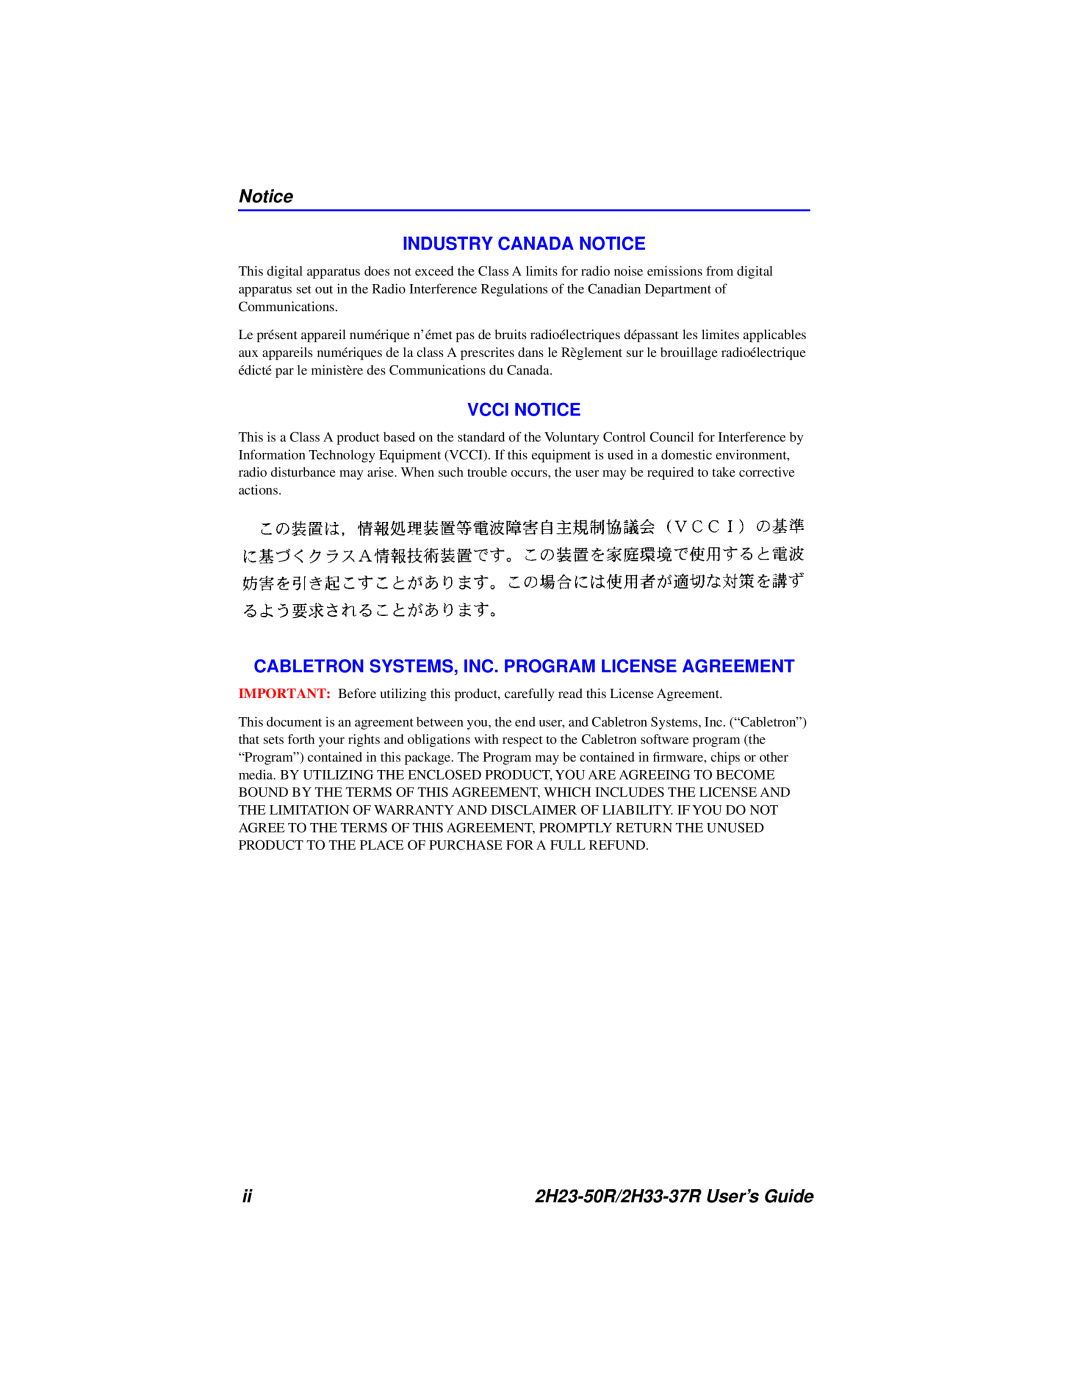 Cabletron Systems 2H33-37R manual Industry Canada Notice, Vcci Notice, Cabletron Systems, Inc. Program License Agreement 